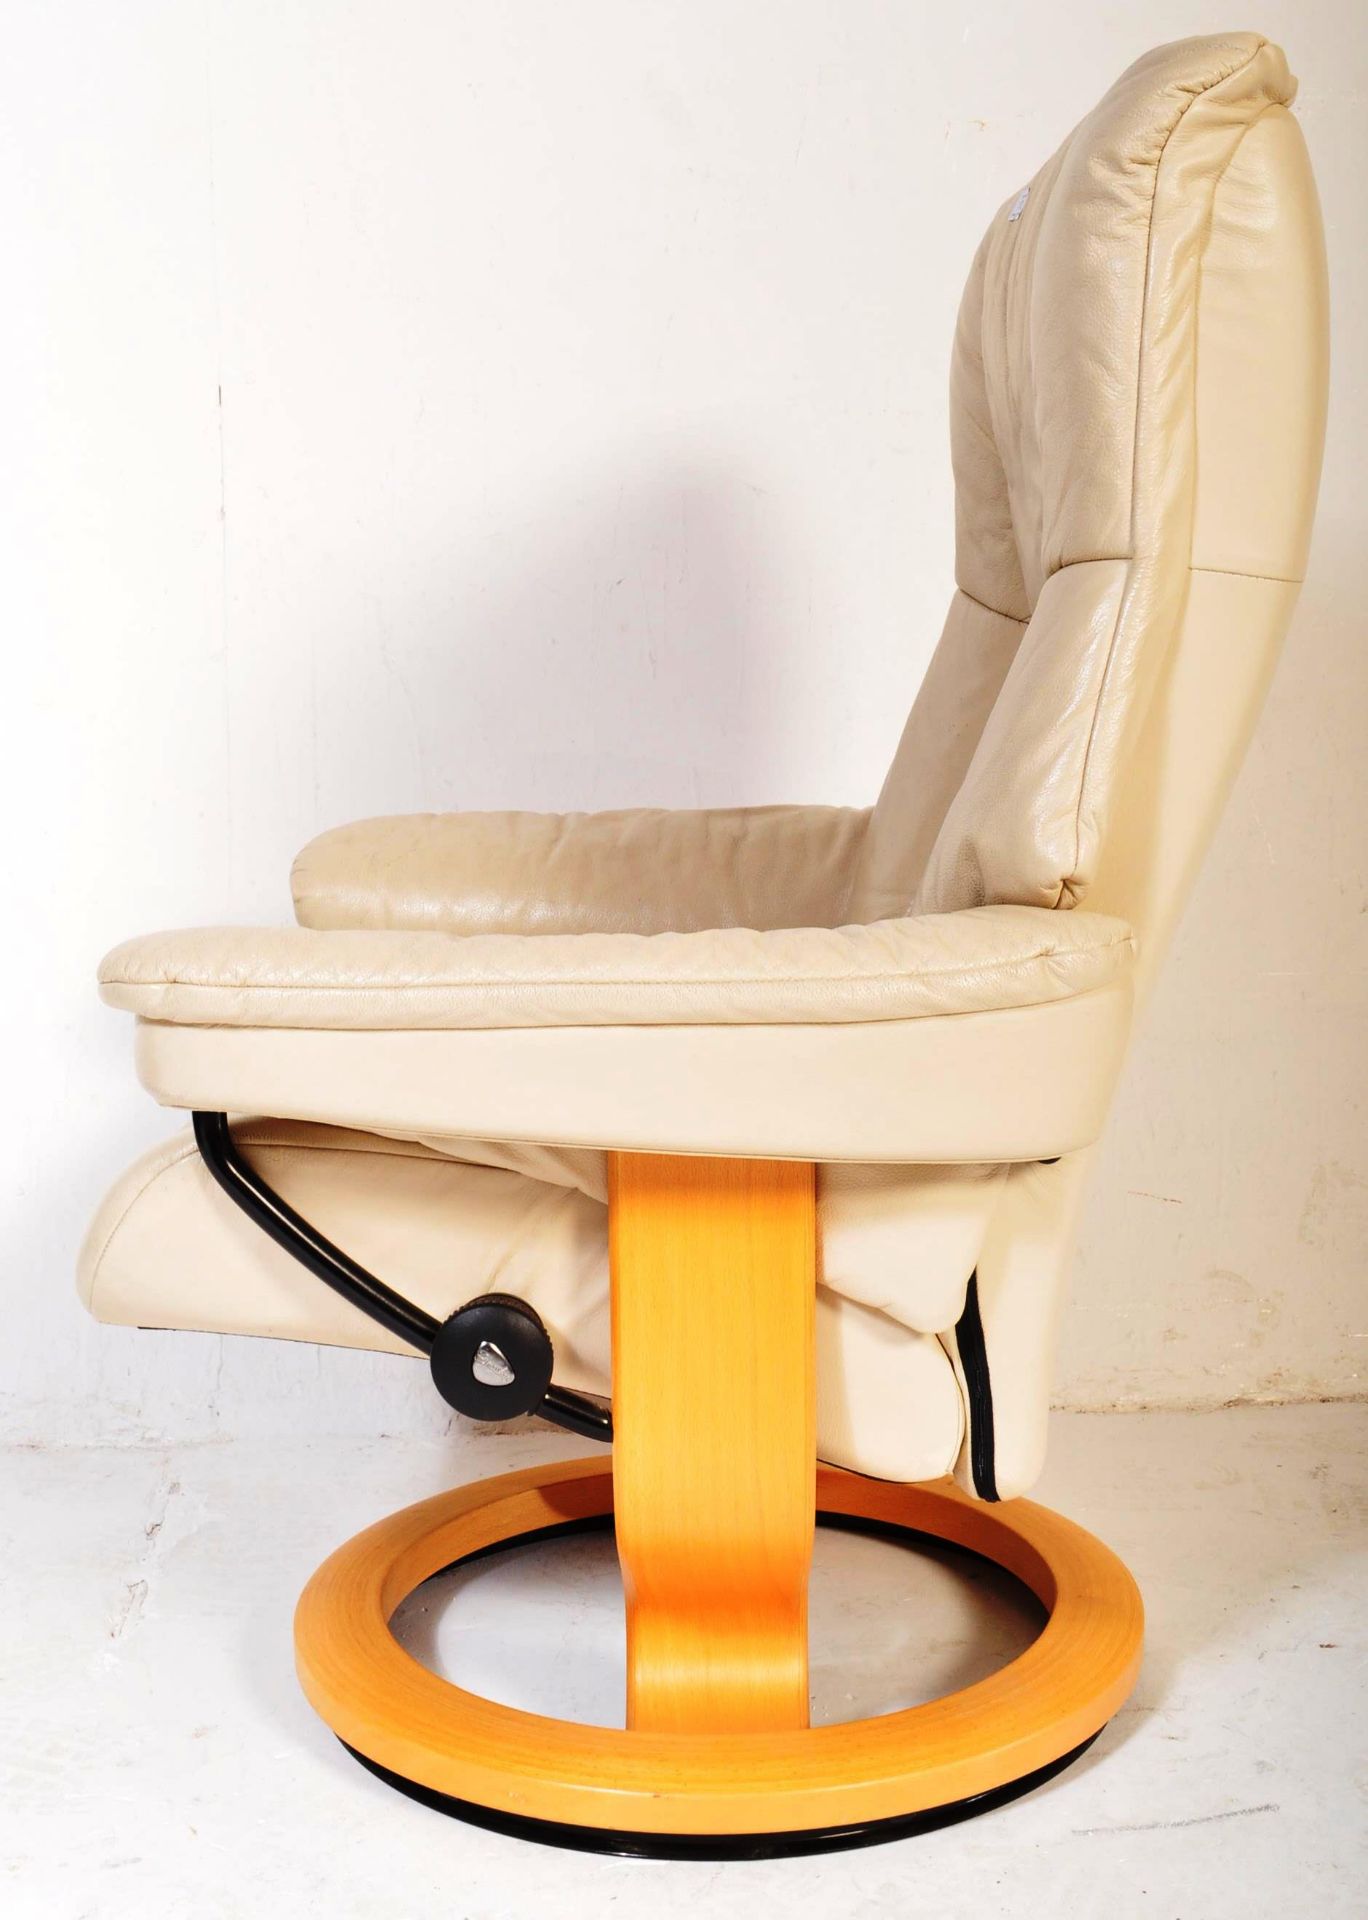 20TH CENTURY CREAM LEATHER STRESS LESS CHAIR - Image 4 of 6